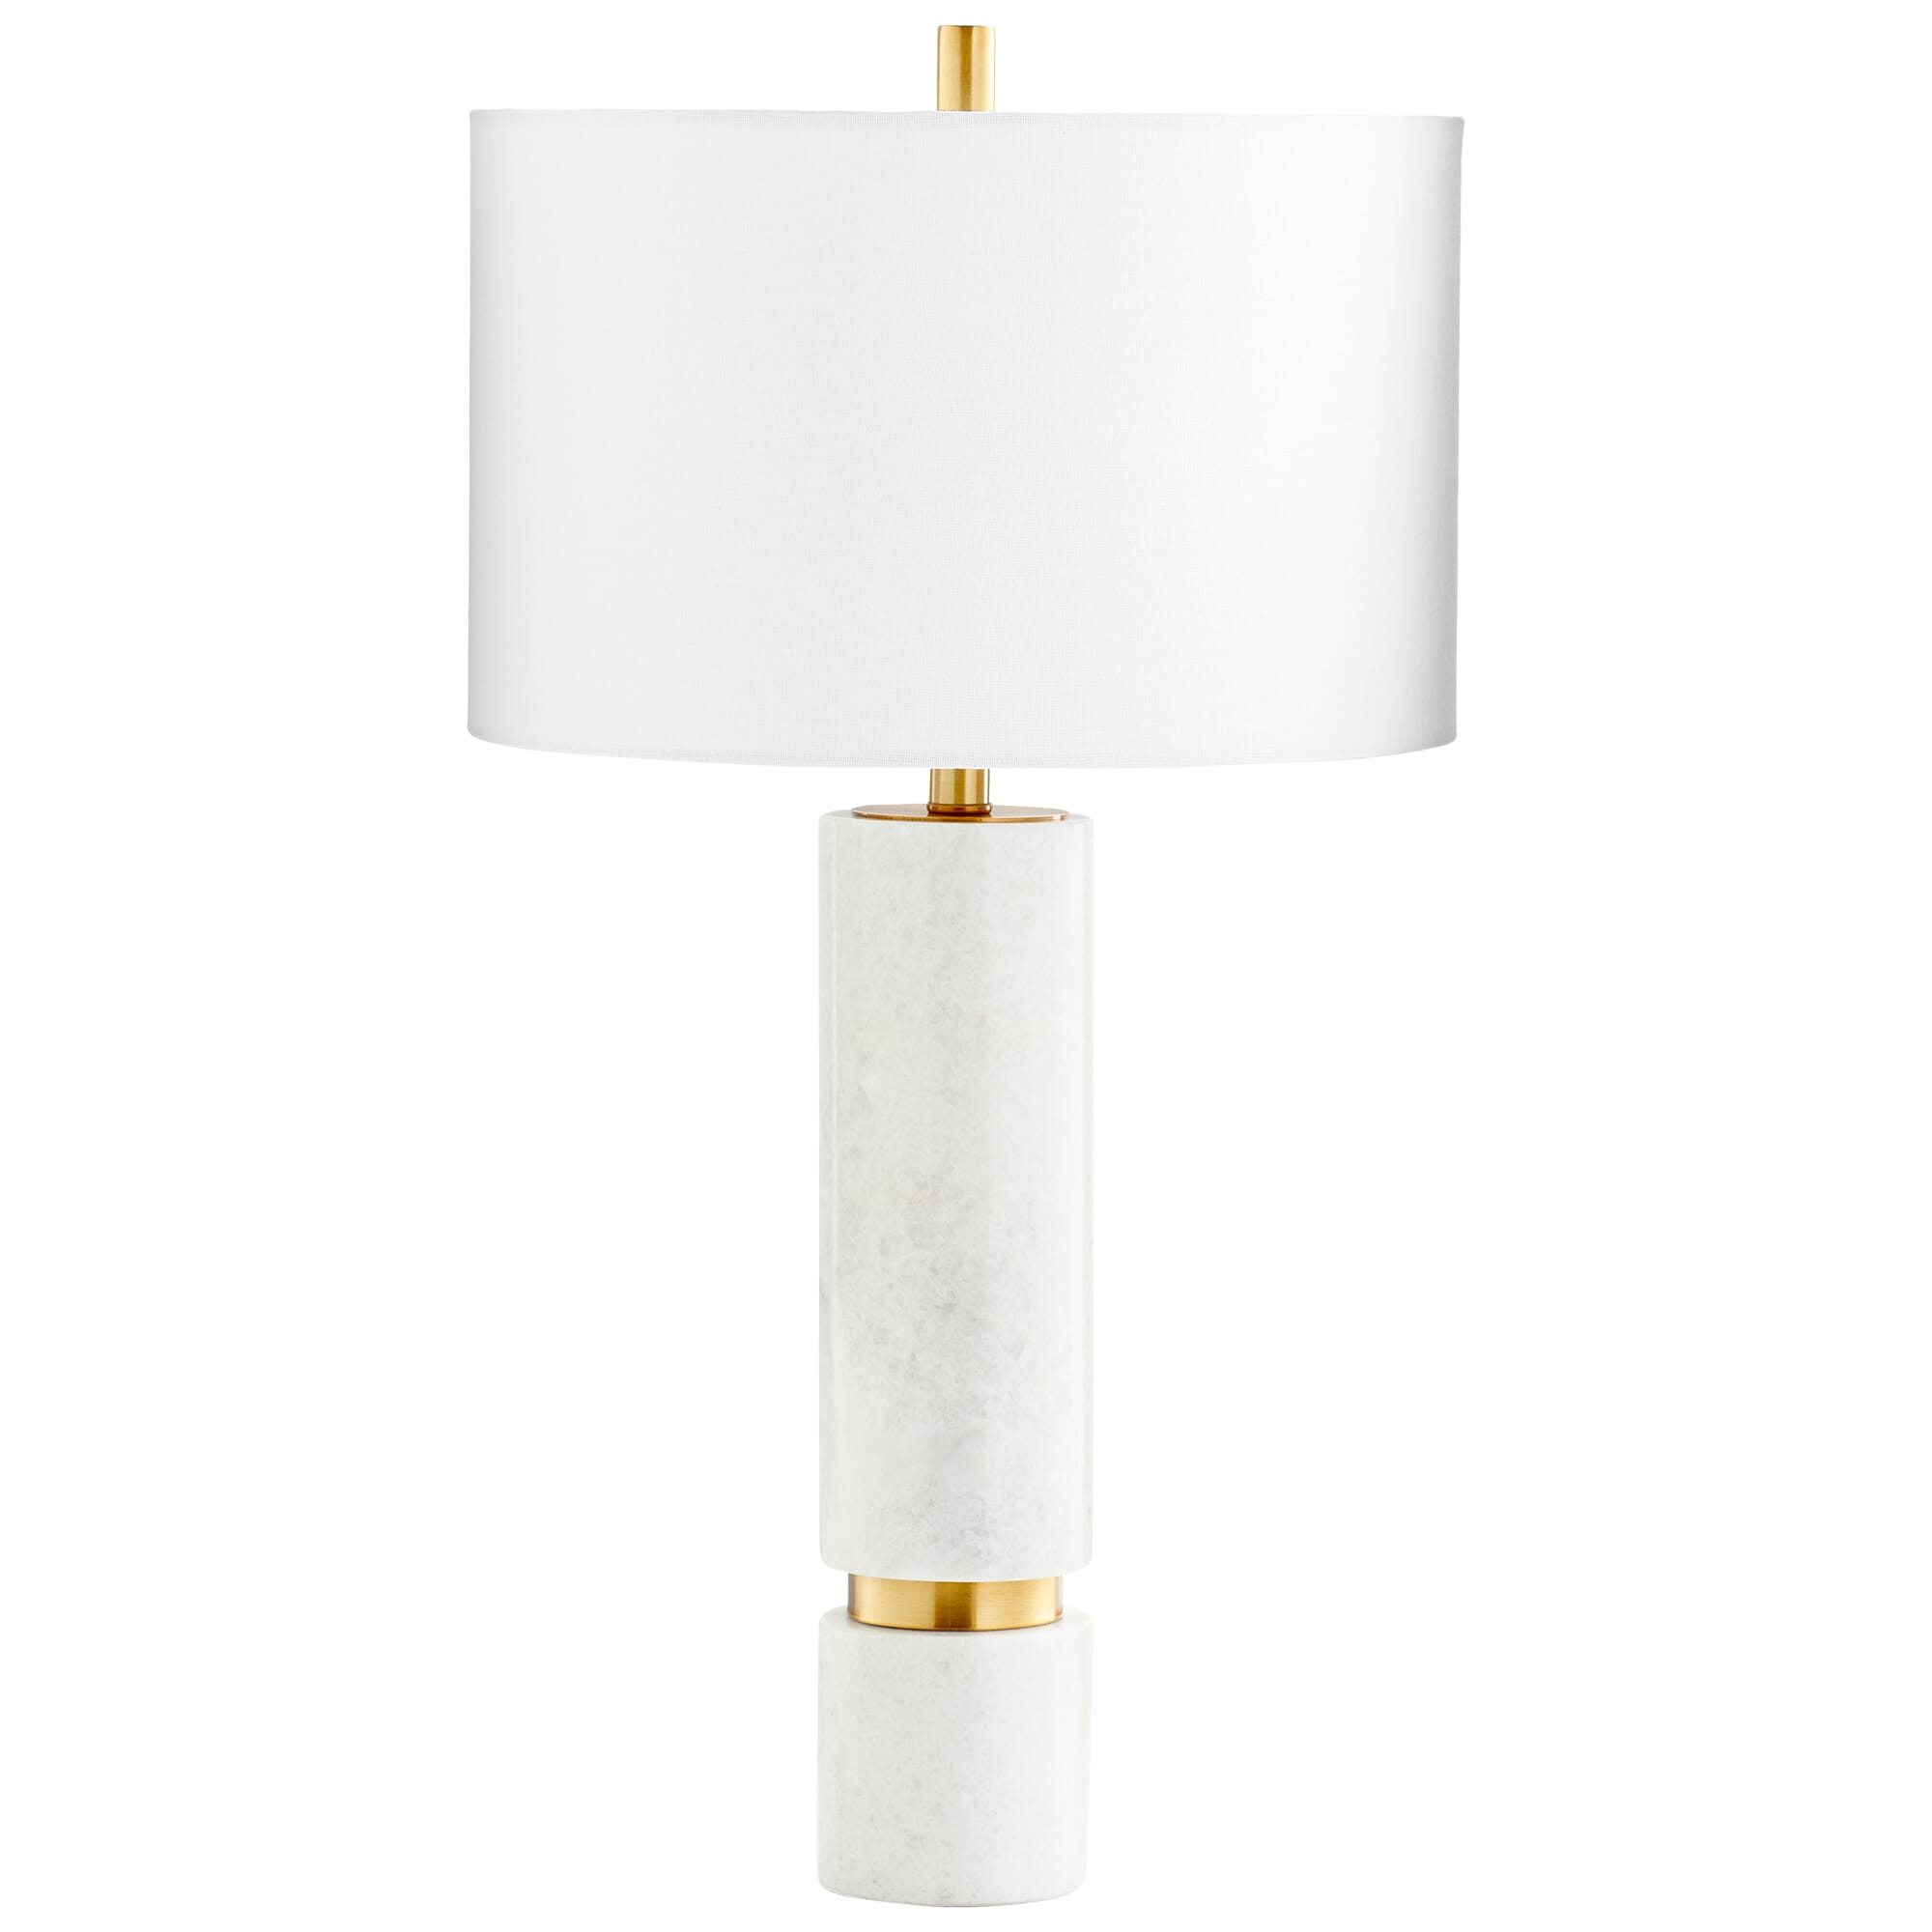 Archer 31" Table Lamp in Brass